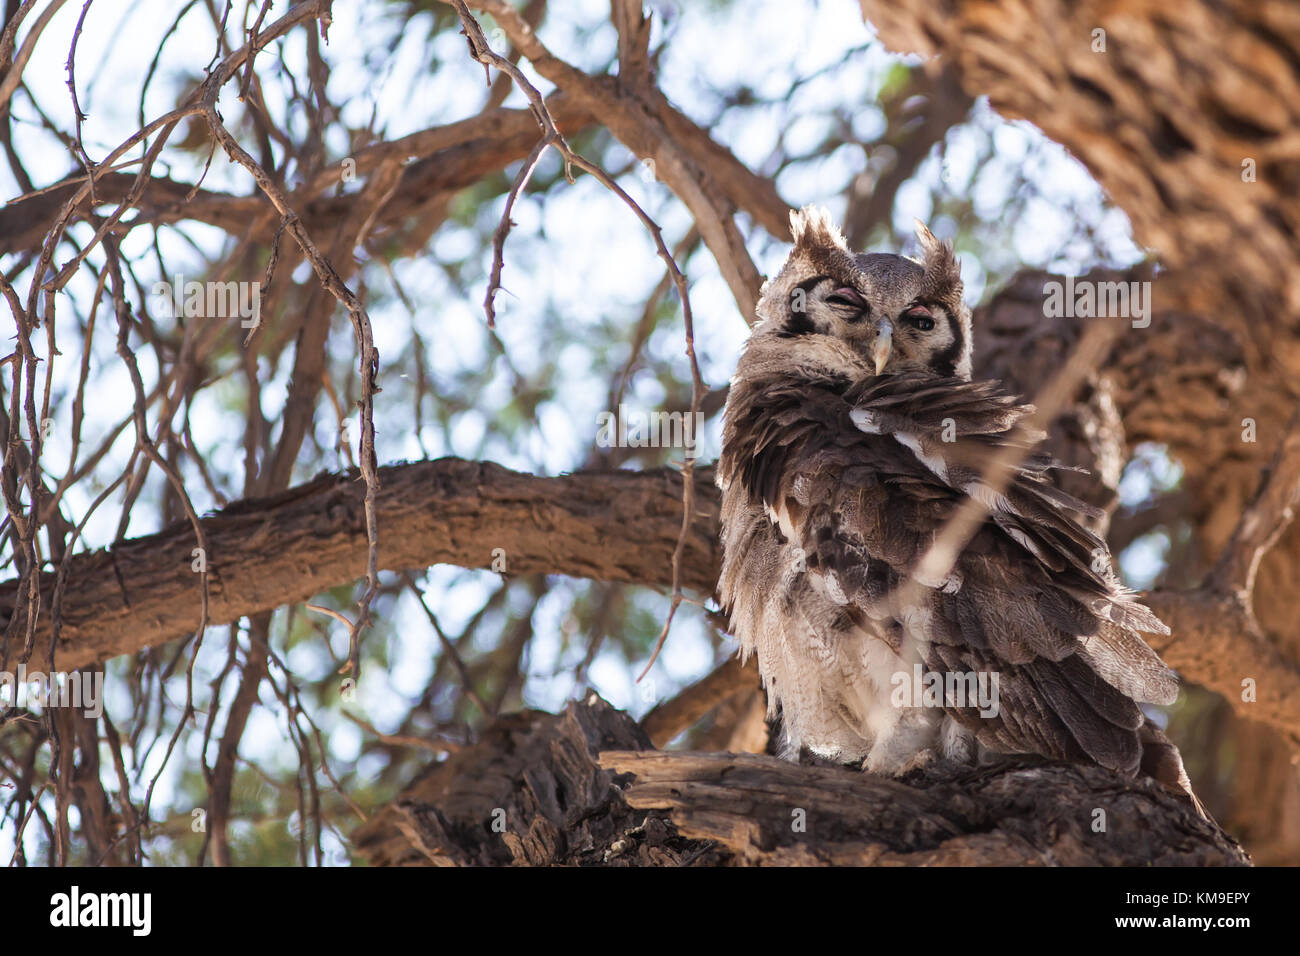 Owl sitting in a tree, Kgalagadi Transfrontier Park, South Africa Stock Photo